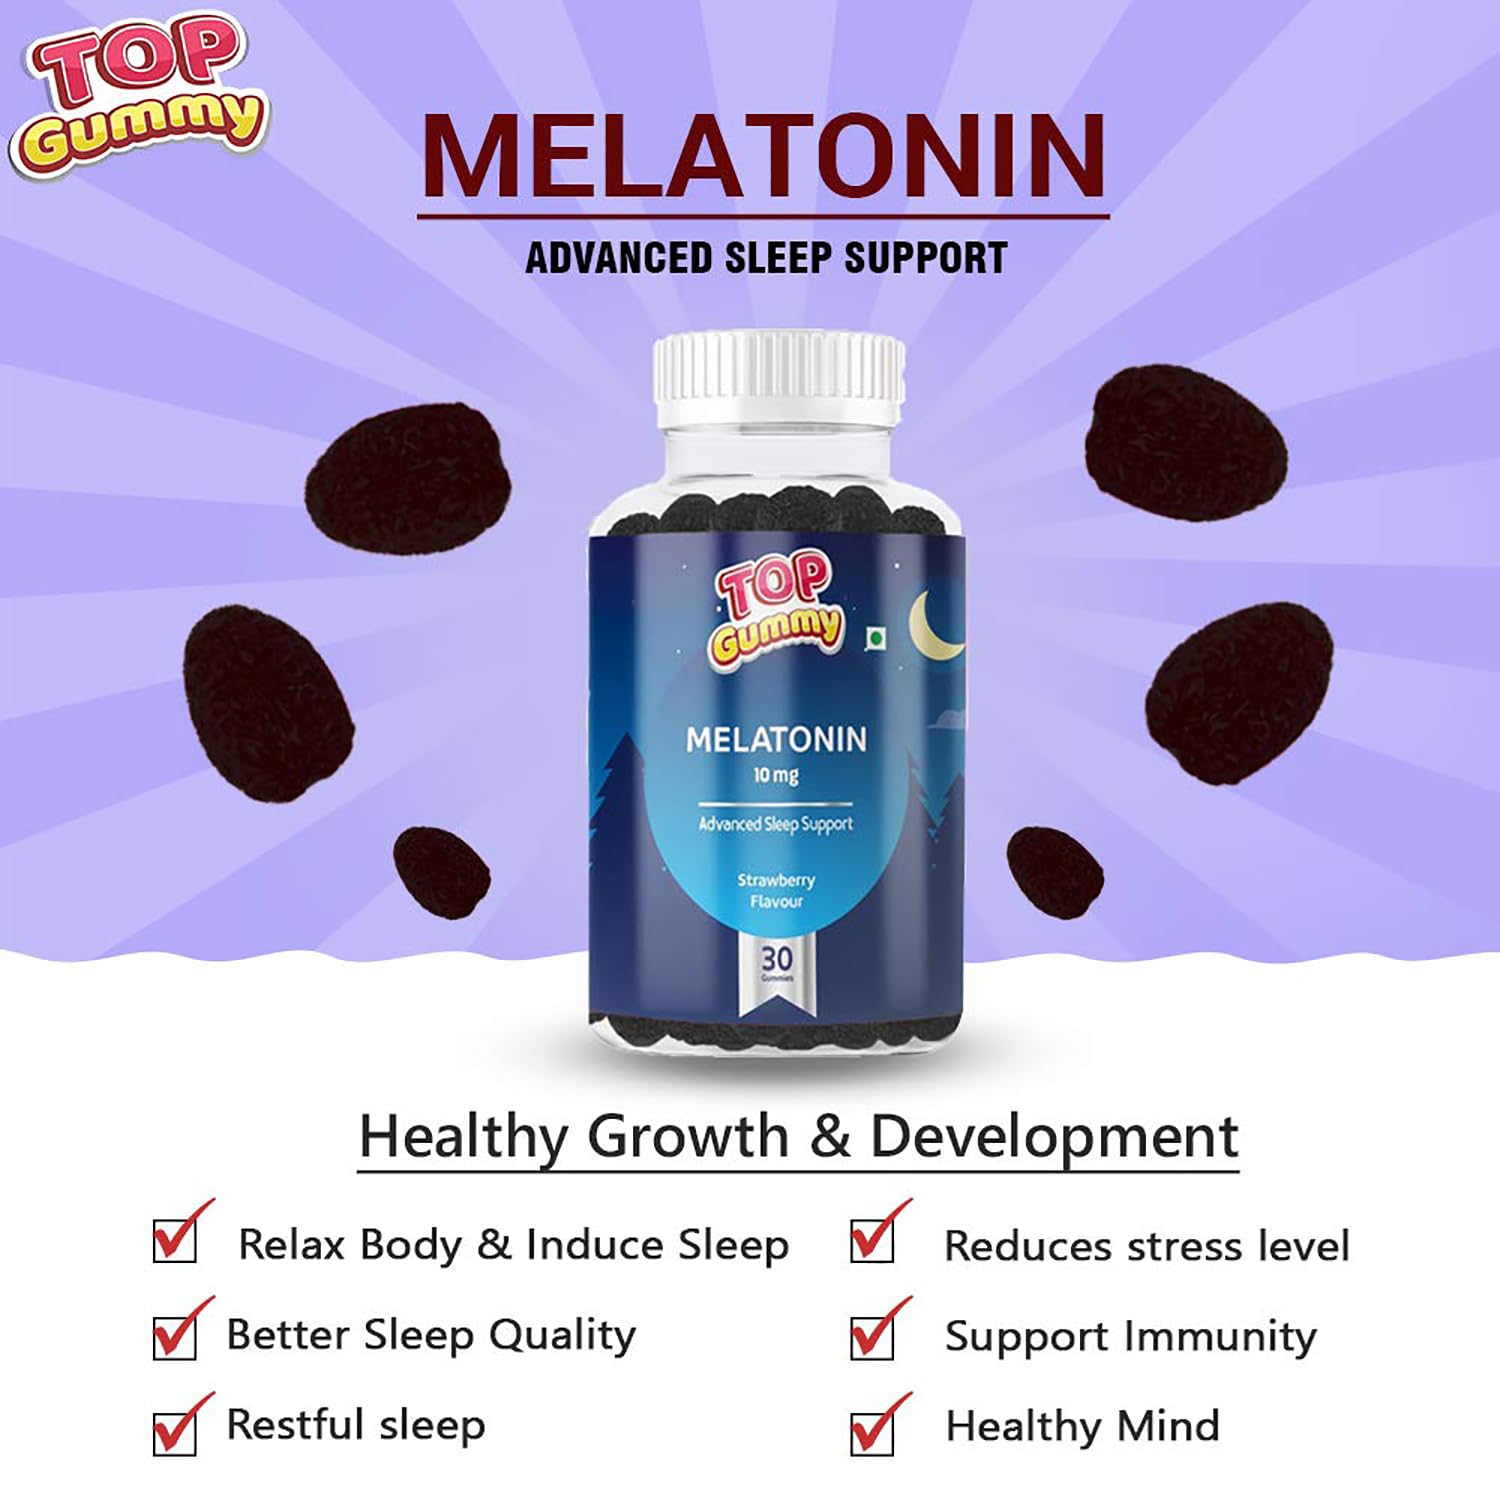 Top Gummy Melatonin 10mg | Advanced Sleep Support, Stay Asleep Longer, Easy to Take, Dissolves in Mouth, Faster Absorption | Gluten, Soy & Dairy Free – 30 Gummies (Strawberry Flavour) (Pack of 3)